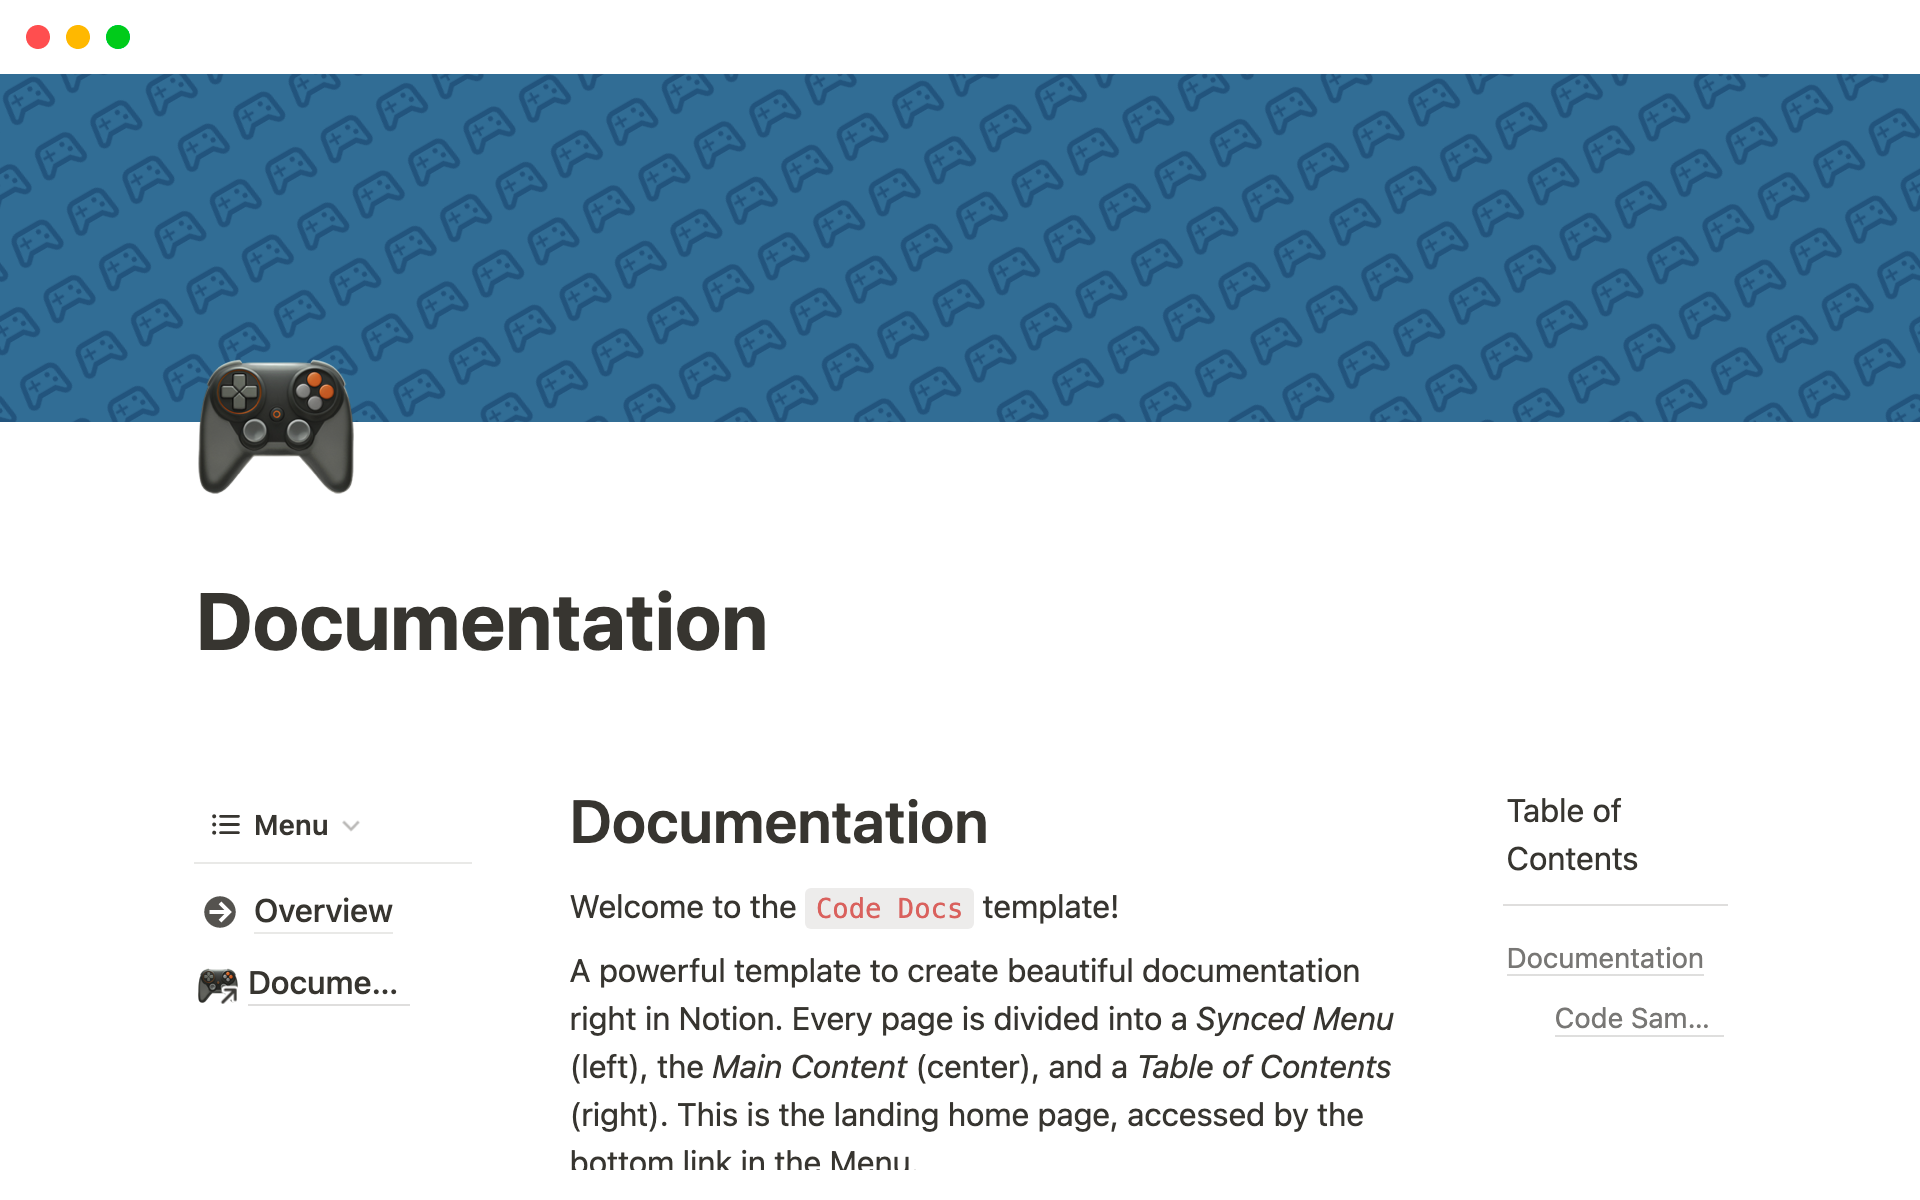 Write beautiful documentation, directly in Notion - includes clean navigation, customisable diagrams, and pre-made content blocks to create new pages in a flash.